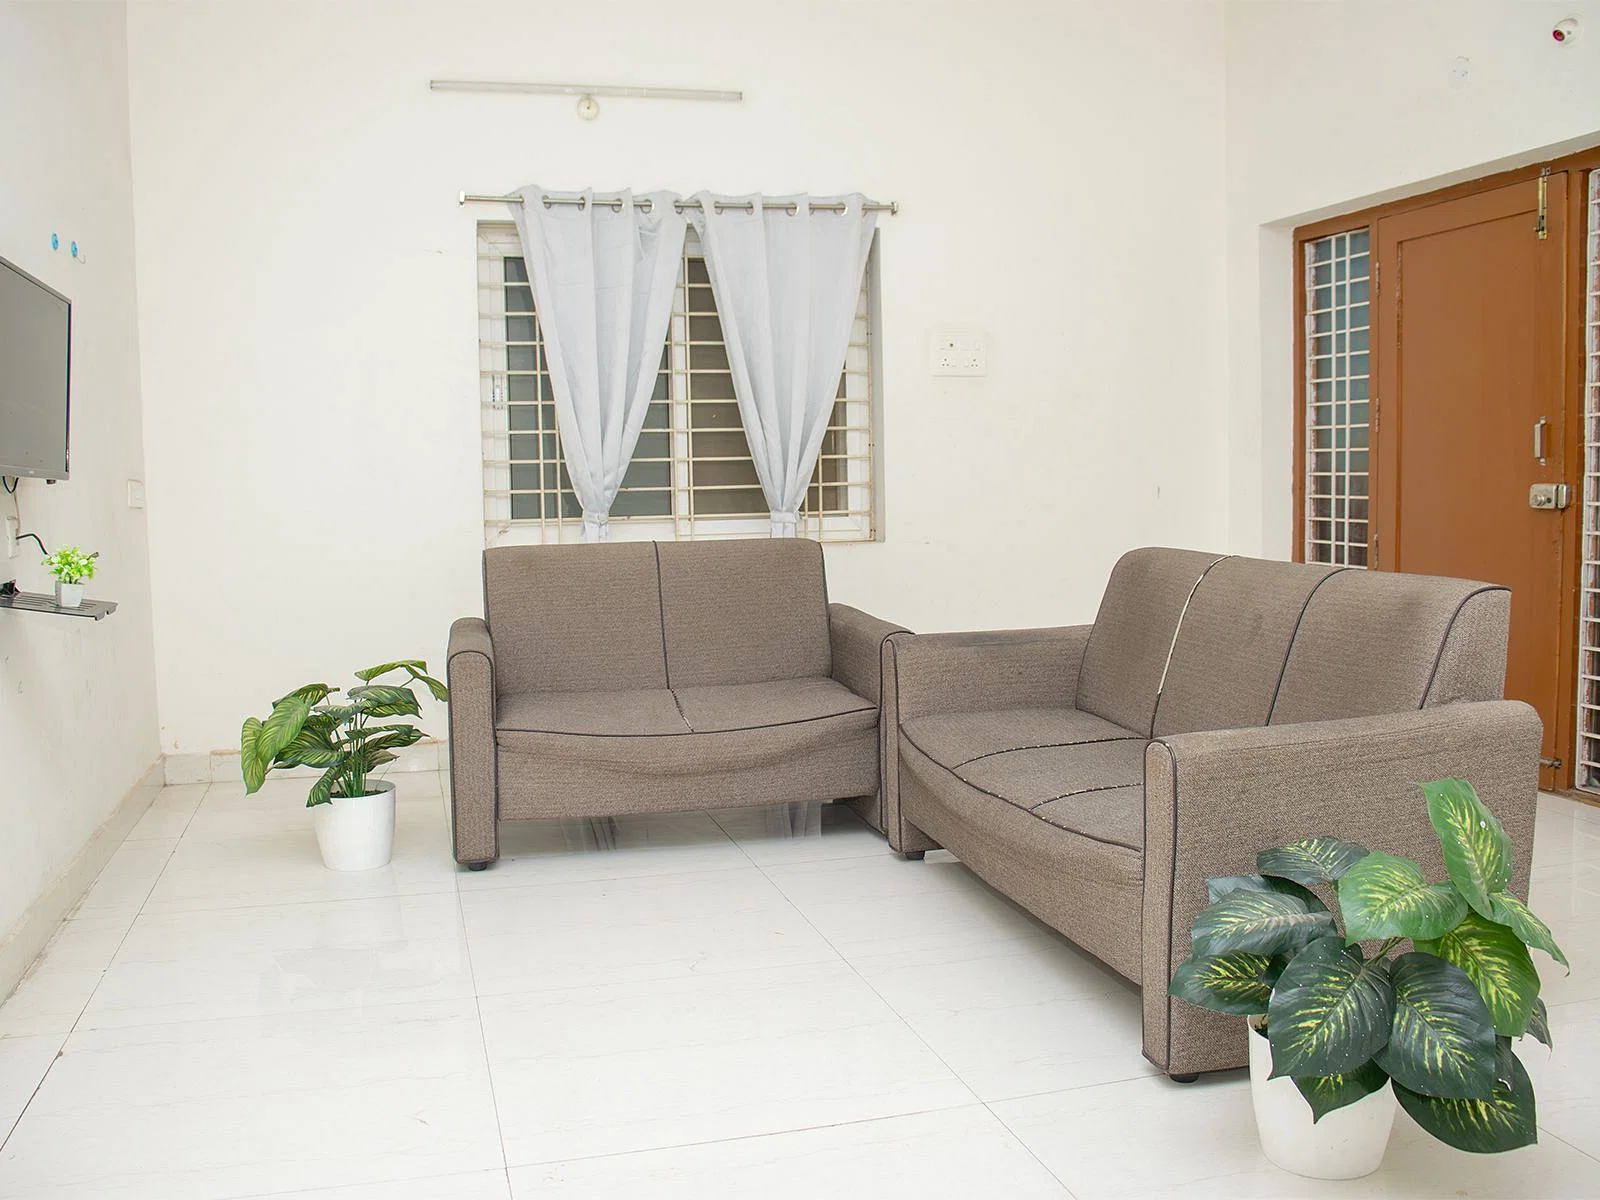 pgs in KPHB with Daily housekeeping facilities and free Wi-Fi-Zolo Midway